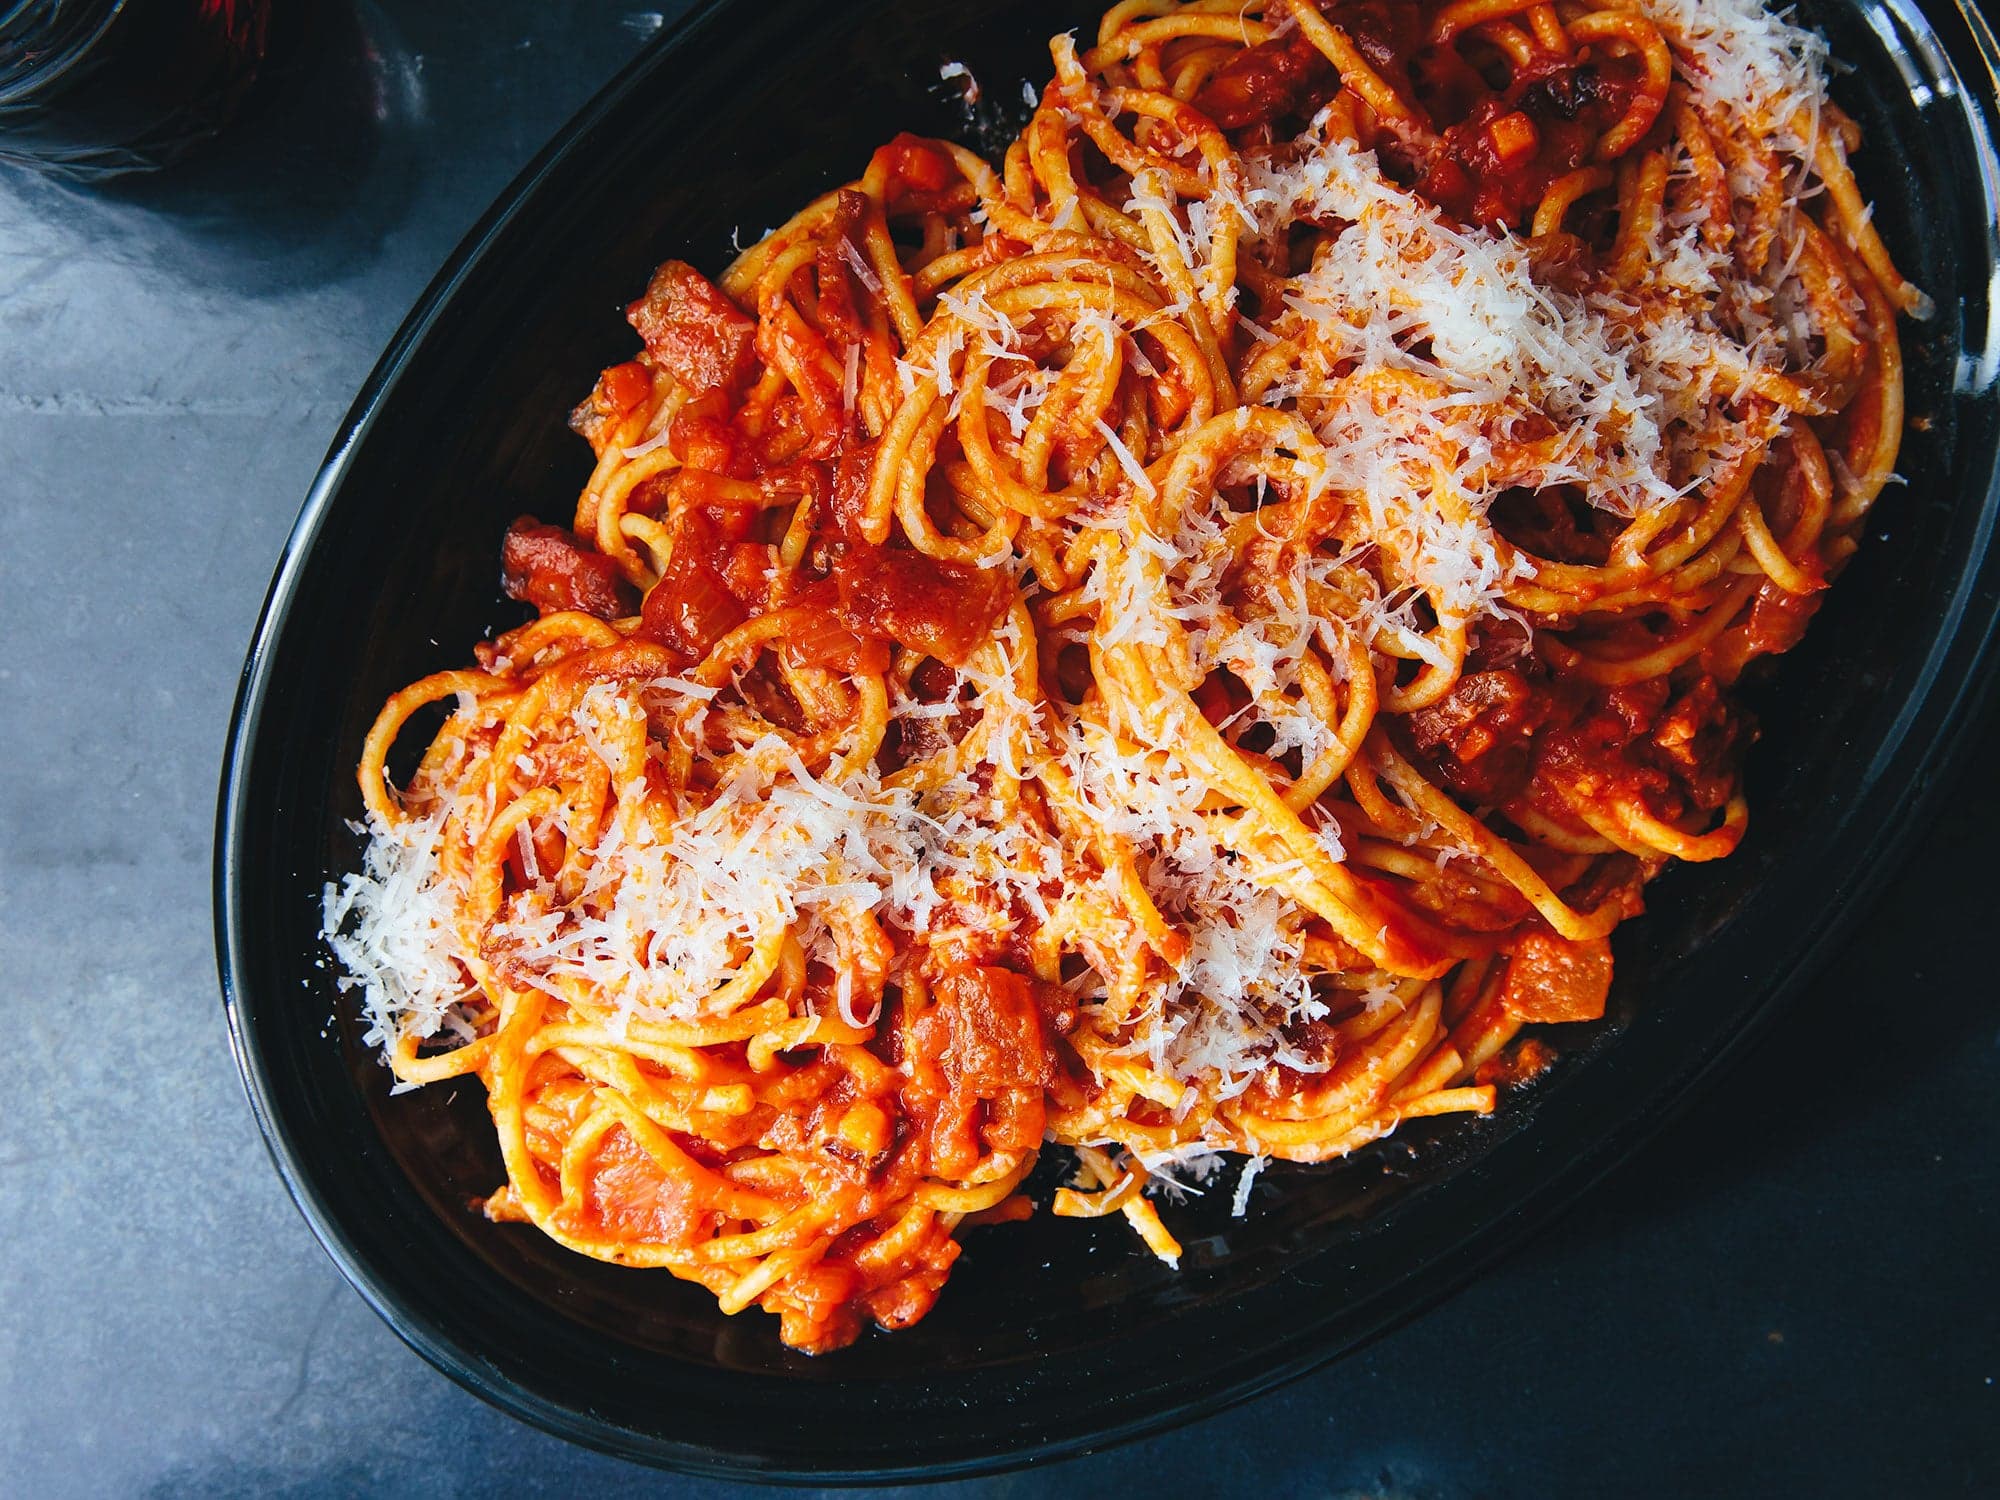 Hollow Pasta with Spicy Tomato Sauce (Bucatini all’Amatriciana)